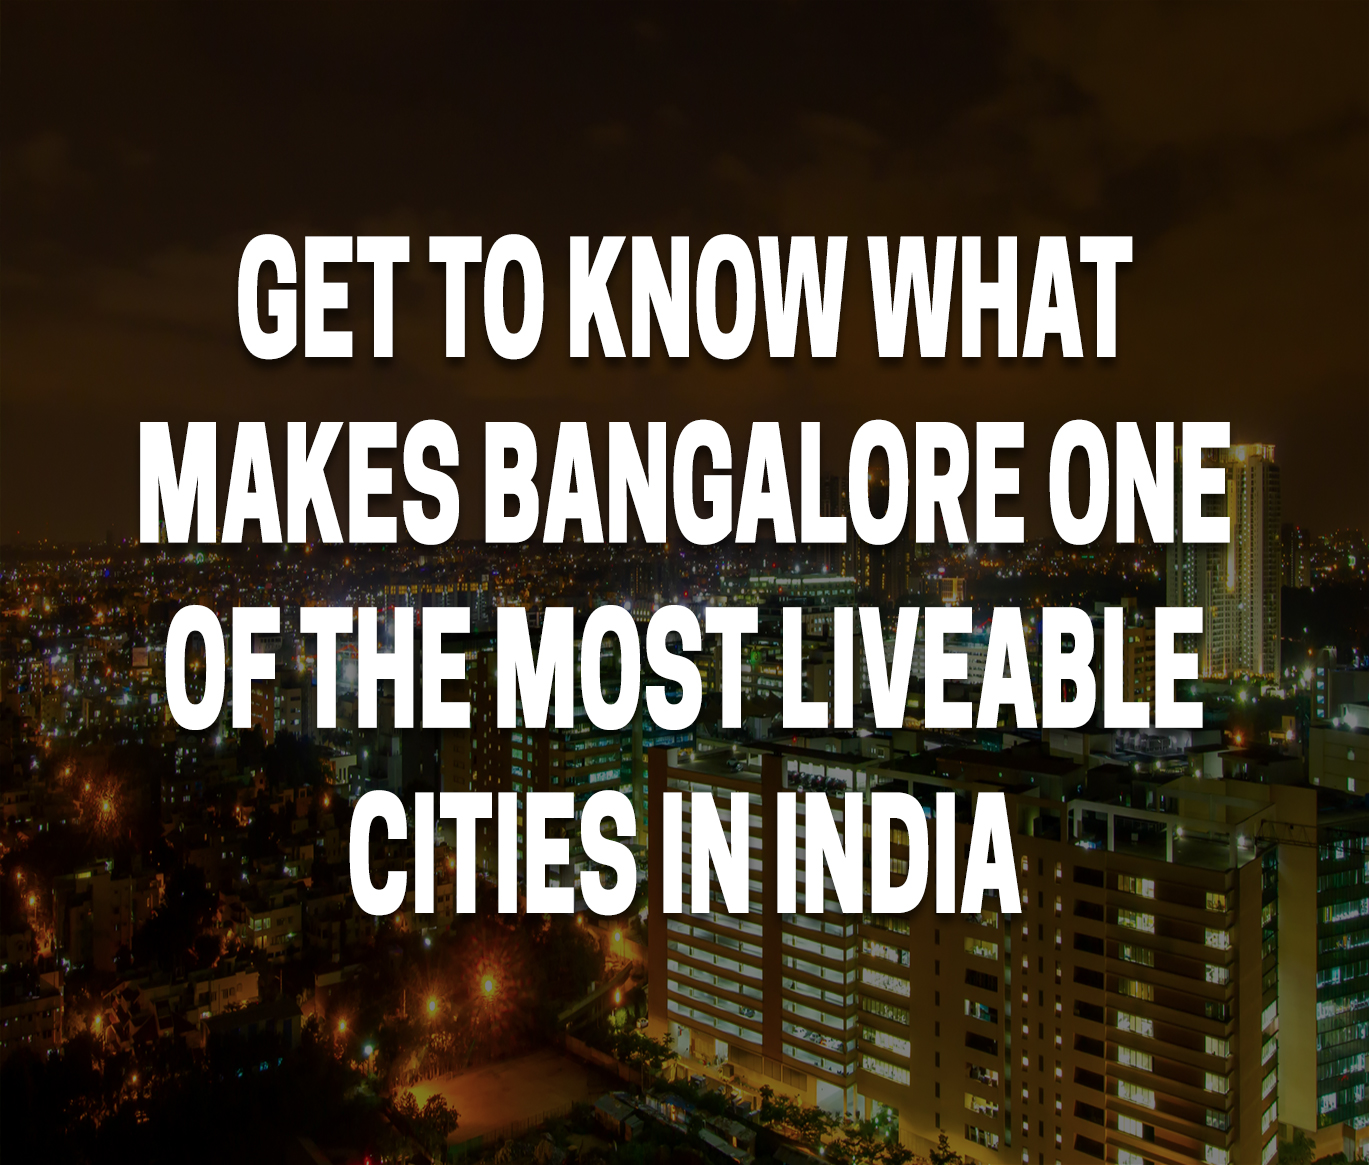 Get to know what makes Bangalore one of the most liveable cities in India